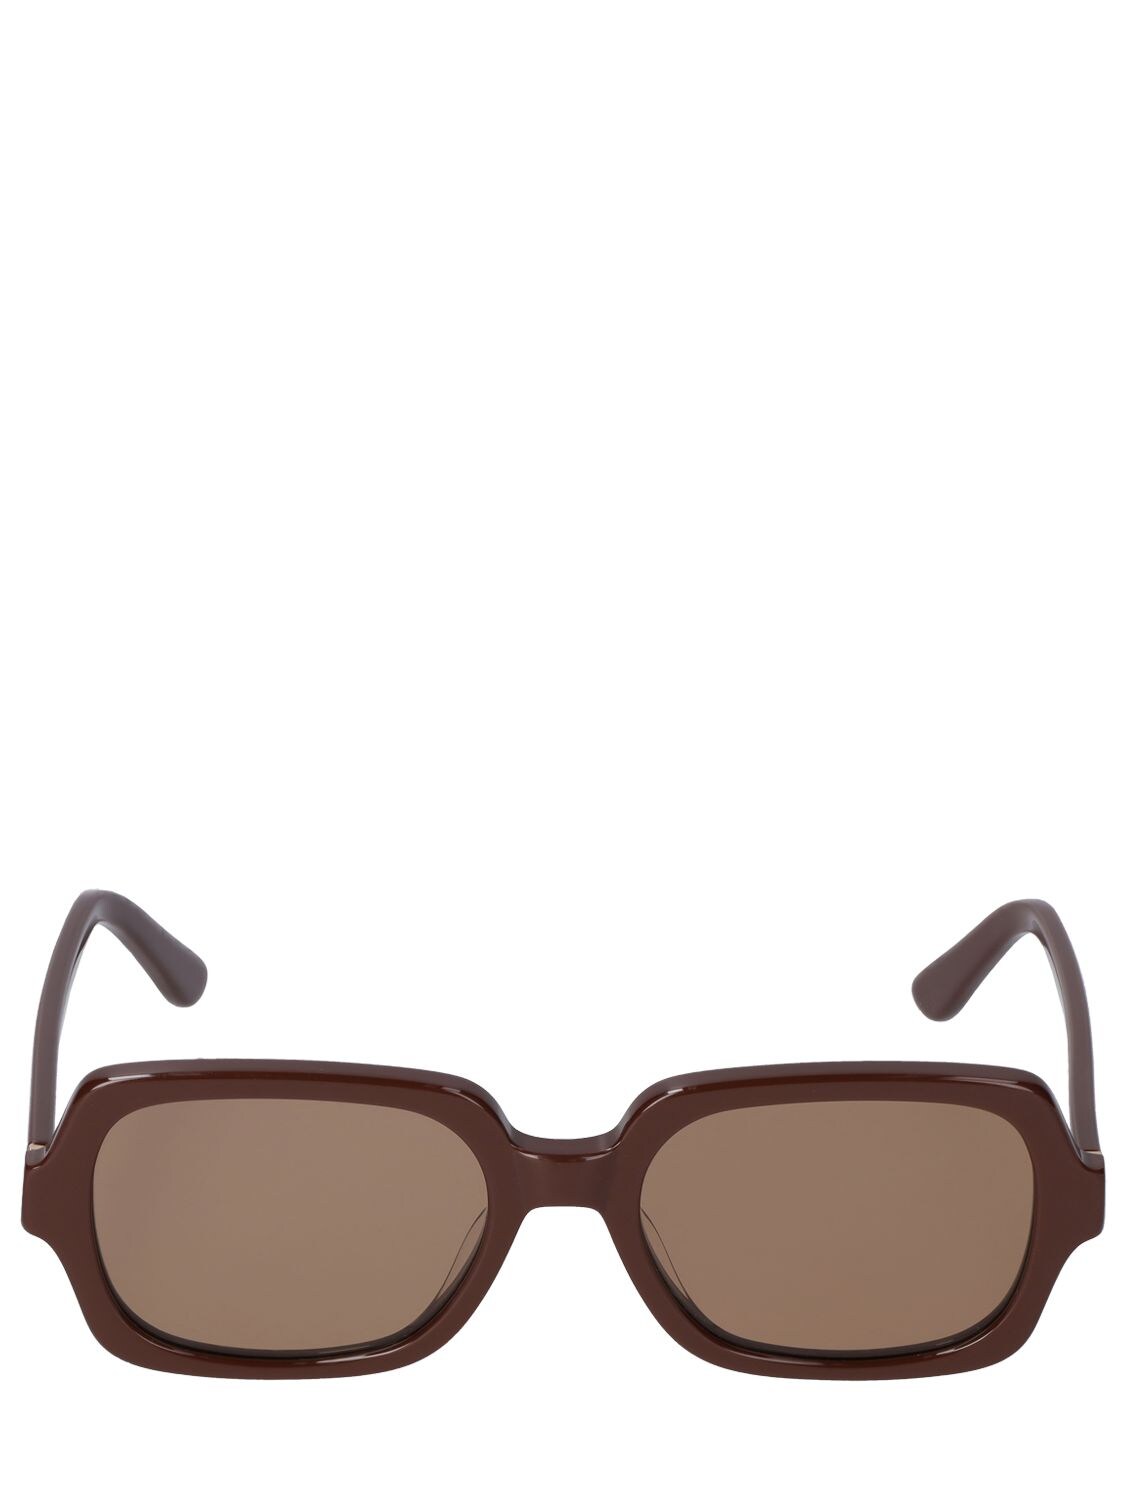 Velvet Canyon L'homme Squared Acetate Sunglasses In Cacao,brown